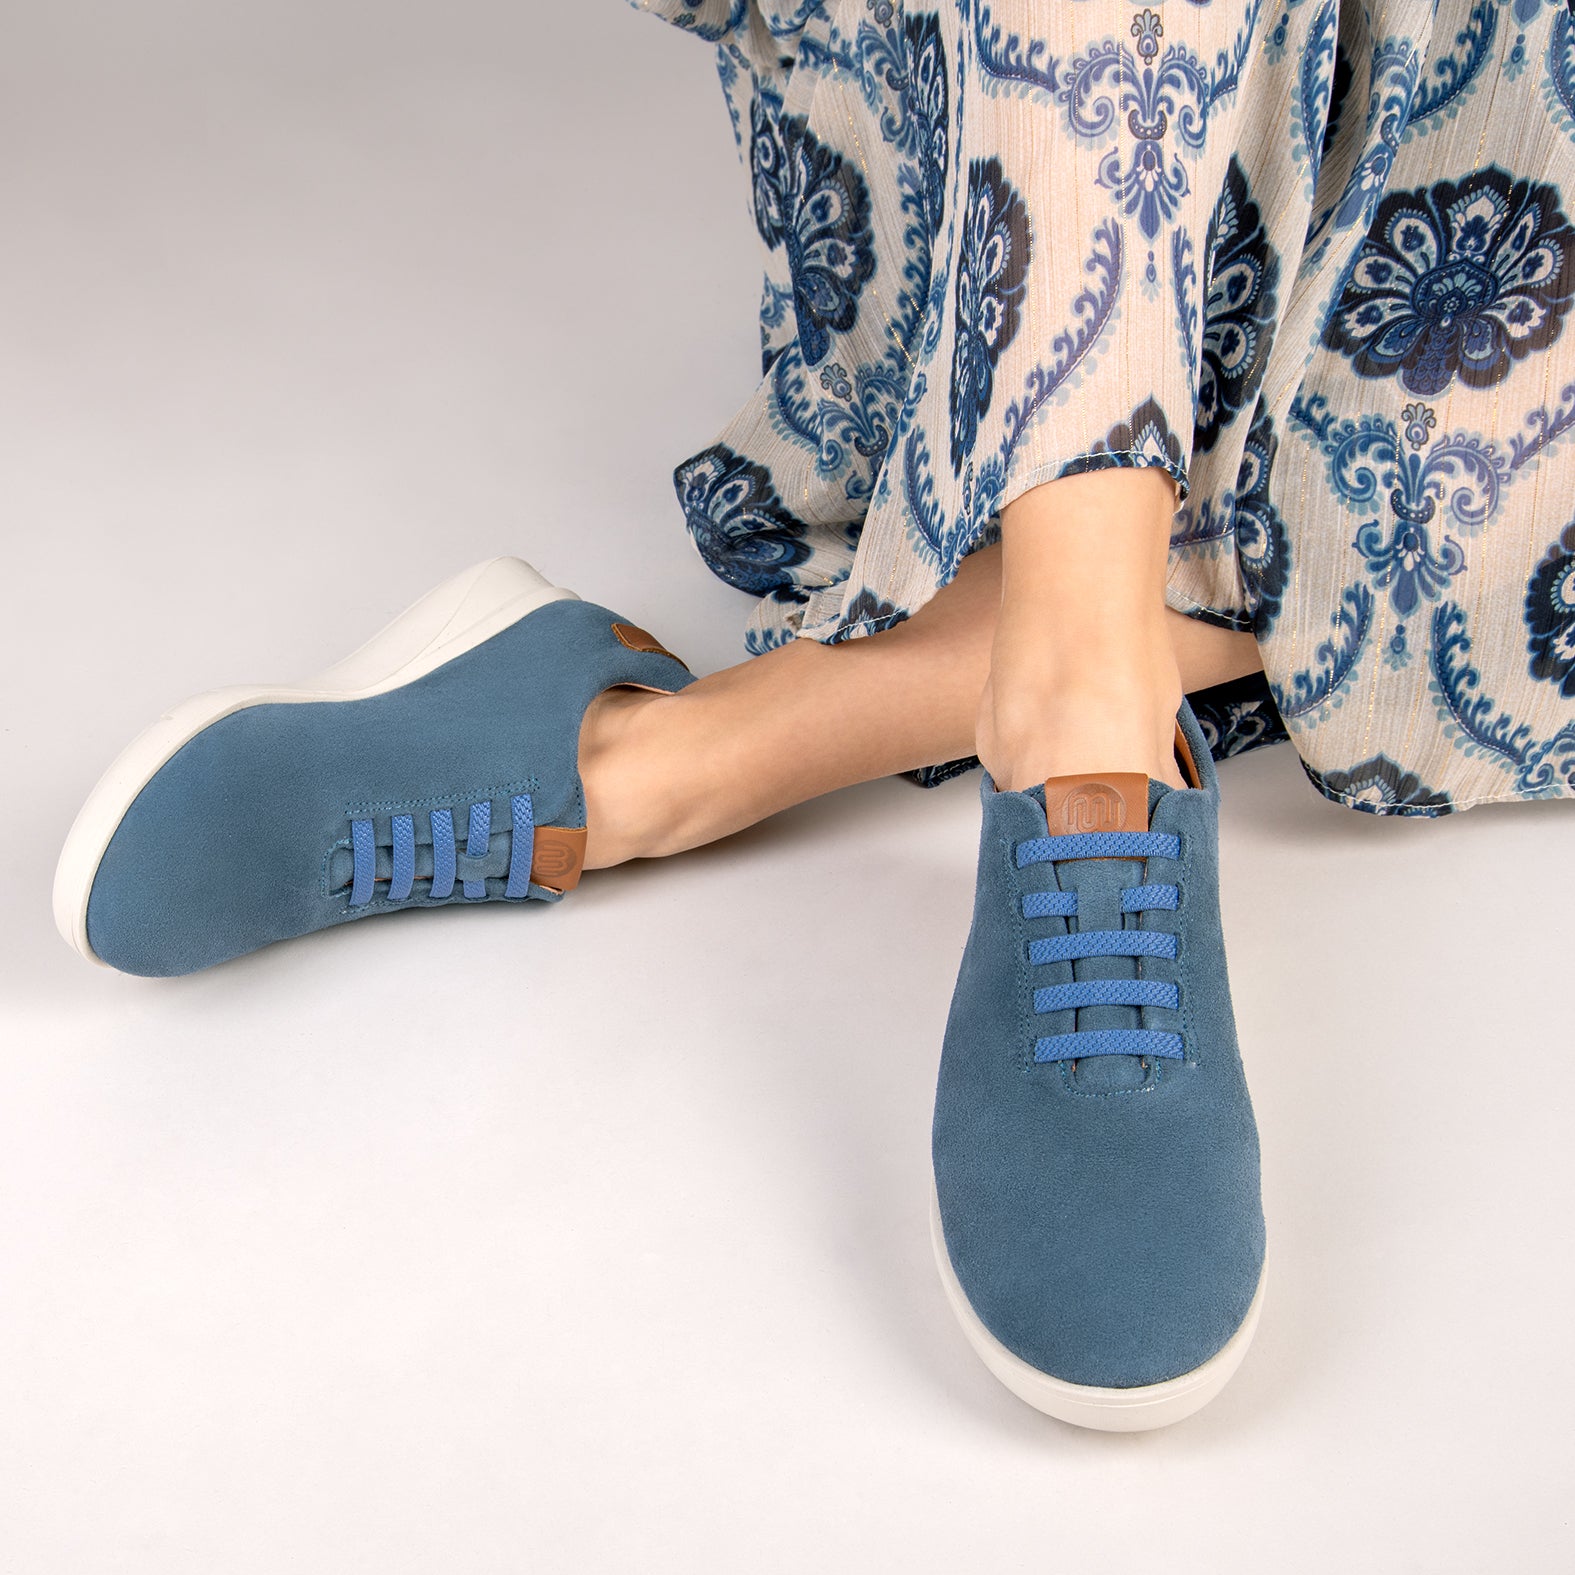 FLY – BLUE casual sneaker with elastic laces